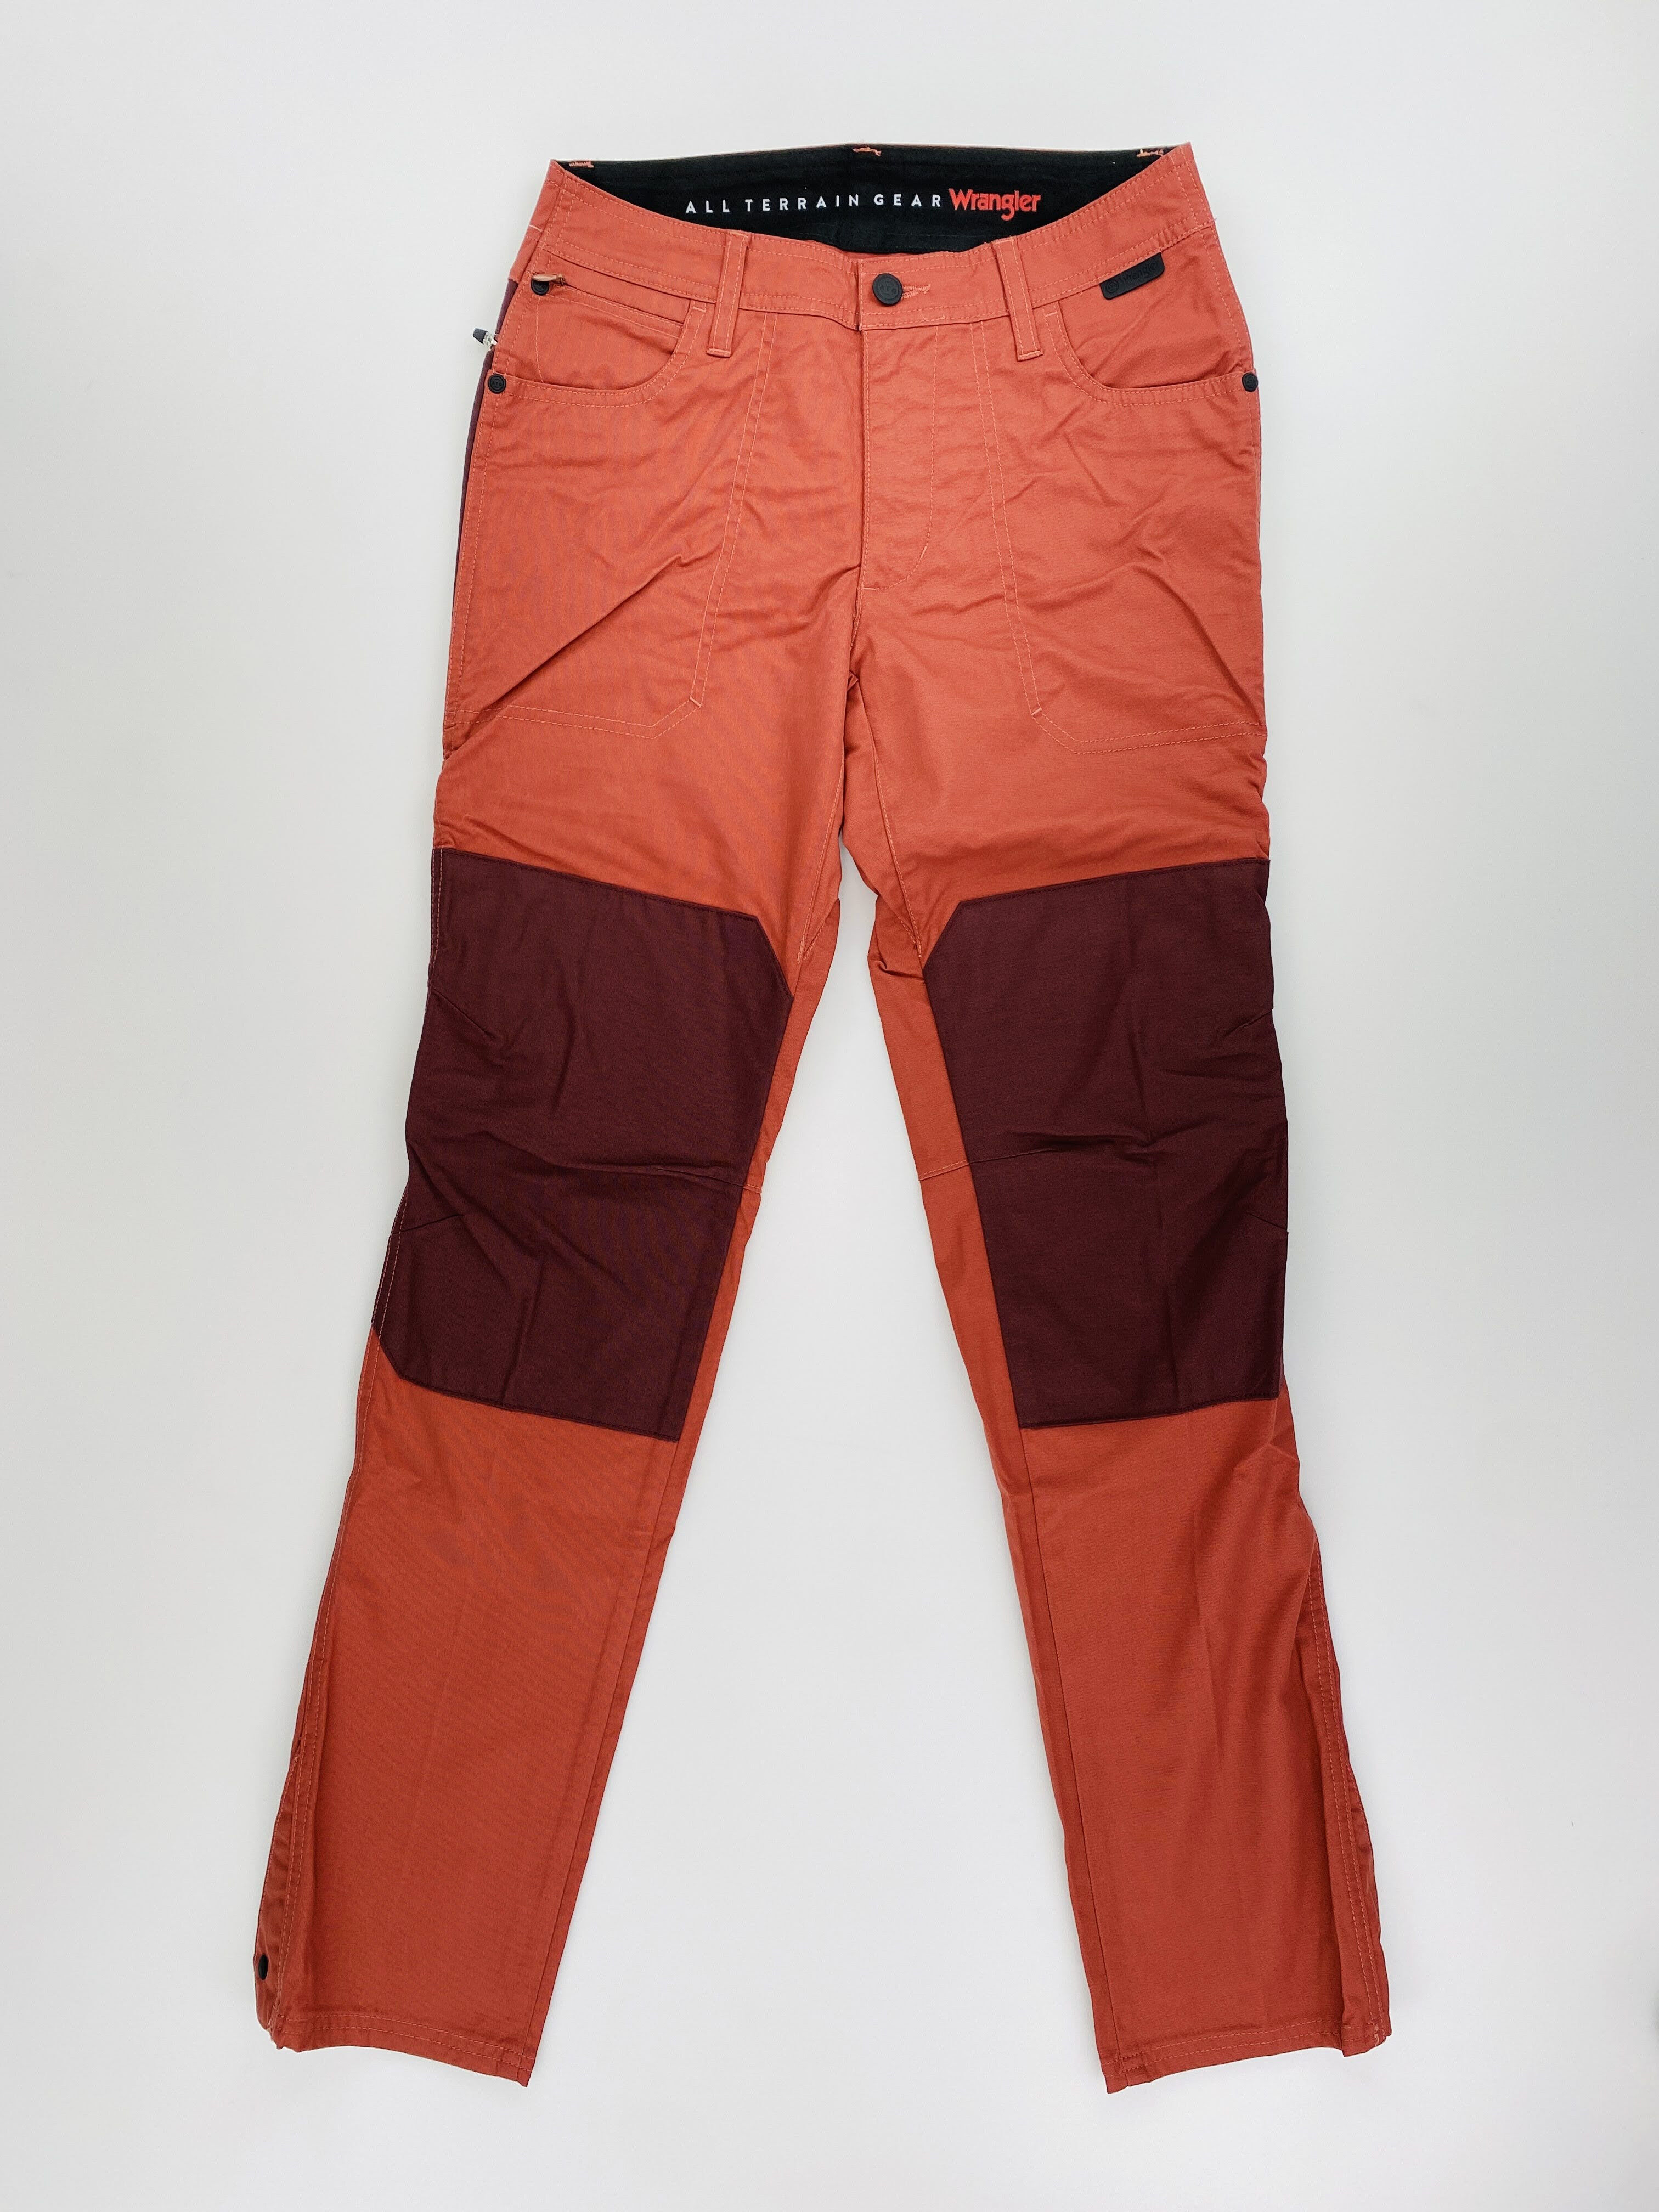 Wrangler Reinforced Softshell Pant - Second Hand Walking trousers - Women's - Red - US 28 | Hardloop